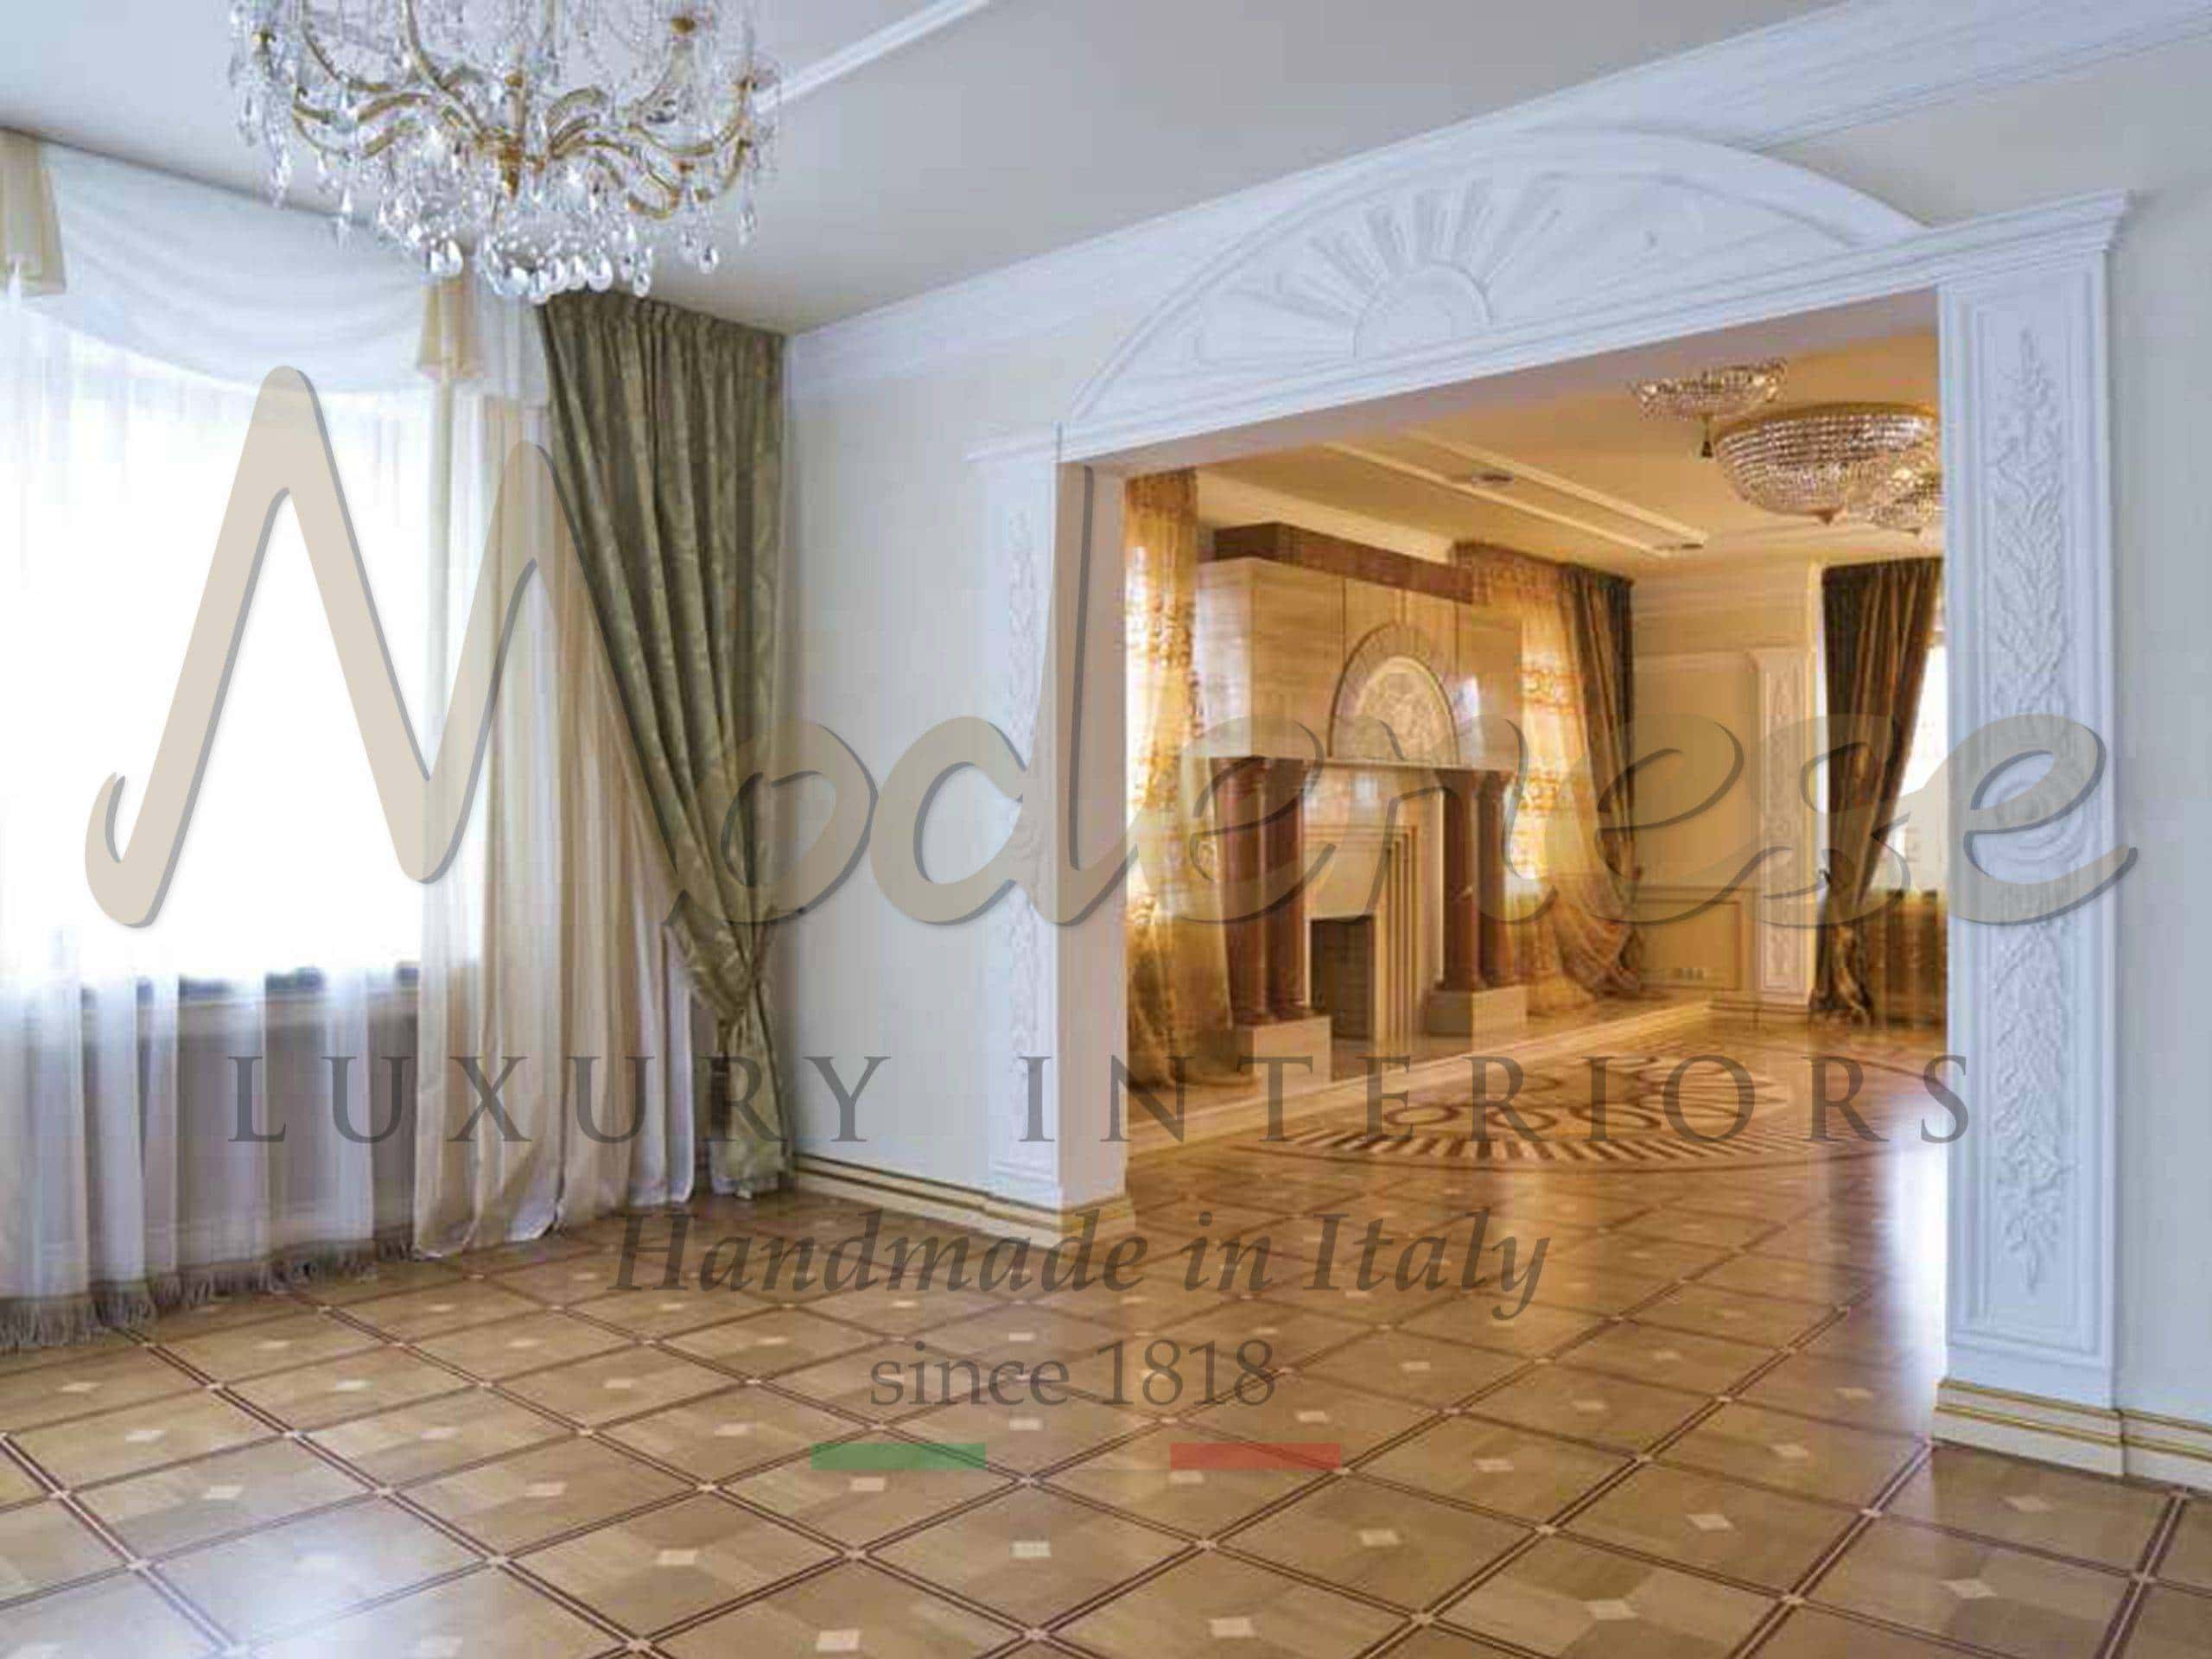 custom made handcrafted design consultant italian taste design service interior decoration residential wooden floor with mother of pearl inserts